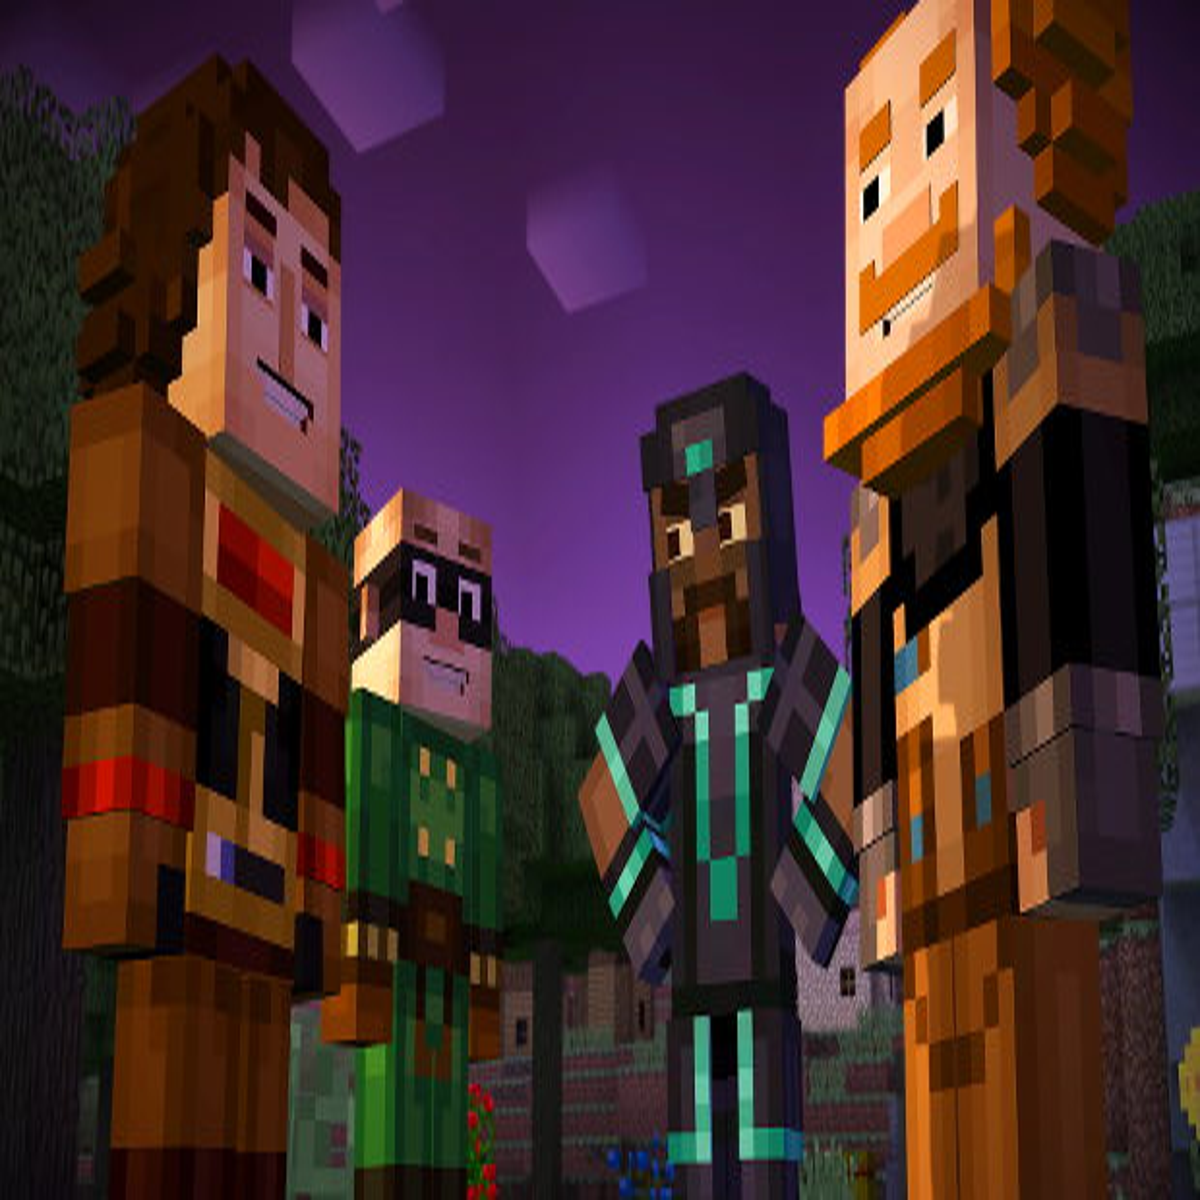 Minecraft: Story Mode Season Two - Official Trailer 